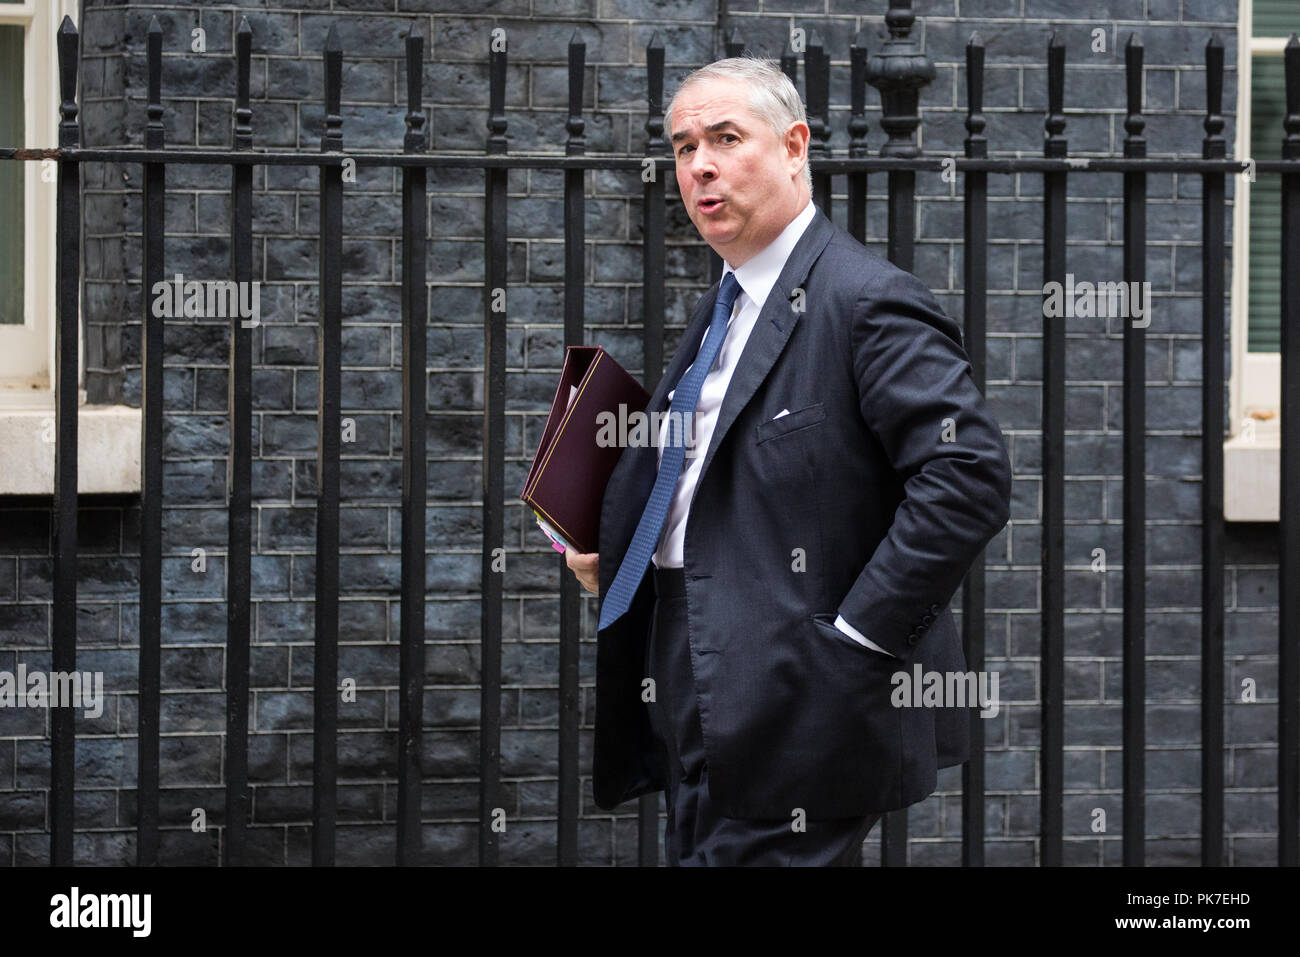 London, UK. 11th September, 2018. Geoffrey Cox QC MP, Attorney General, arrives at 10 Downing Street for a Cabinet meeting. Credit: Mark Kerrison/Alamy Live News Stock Photo